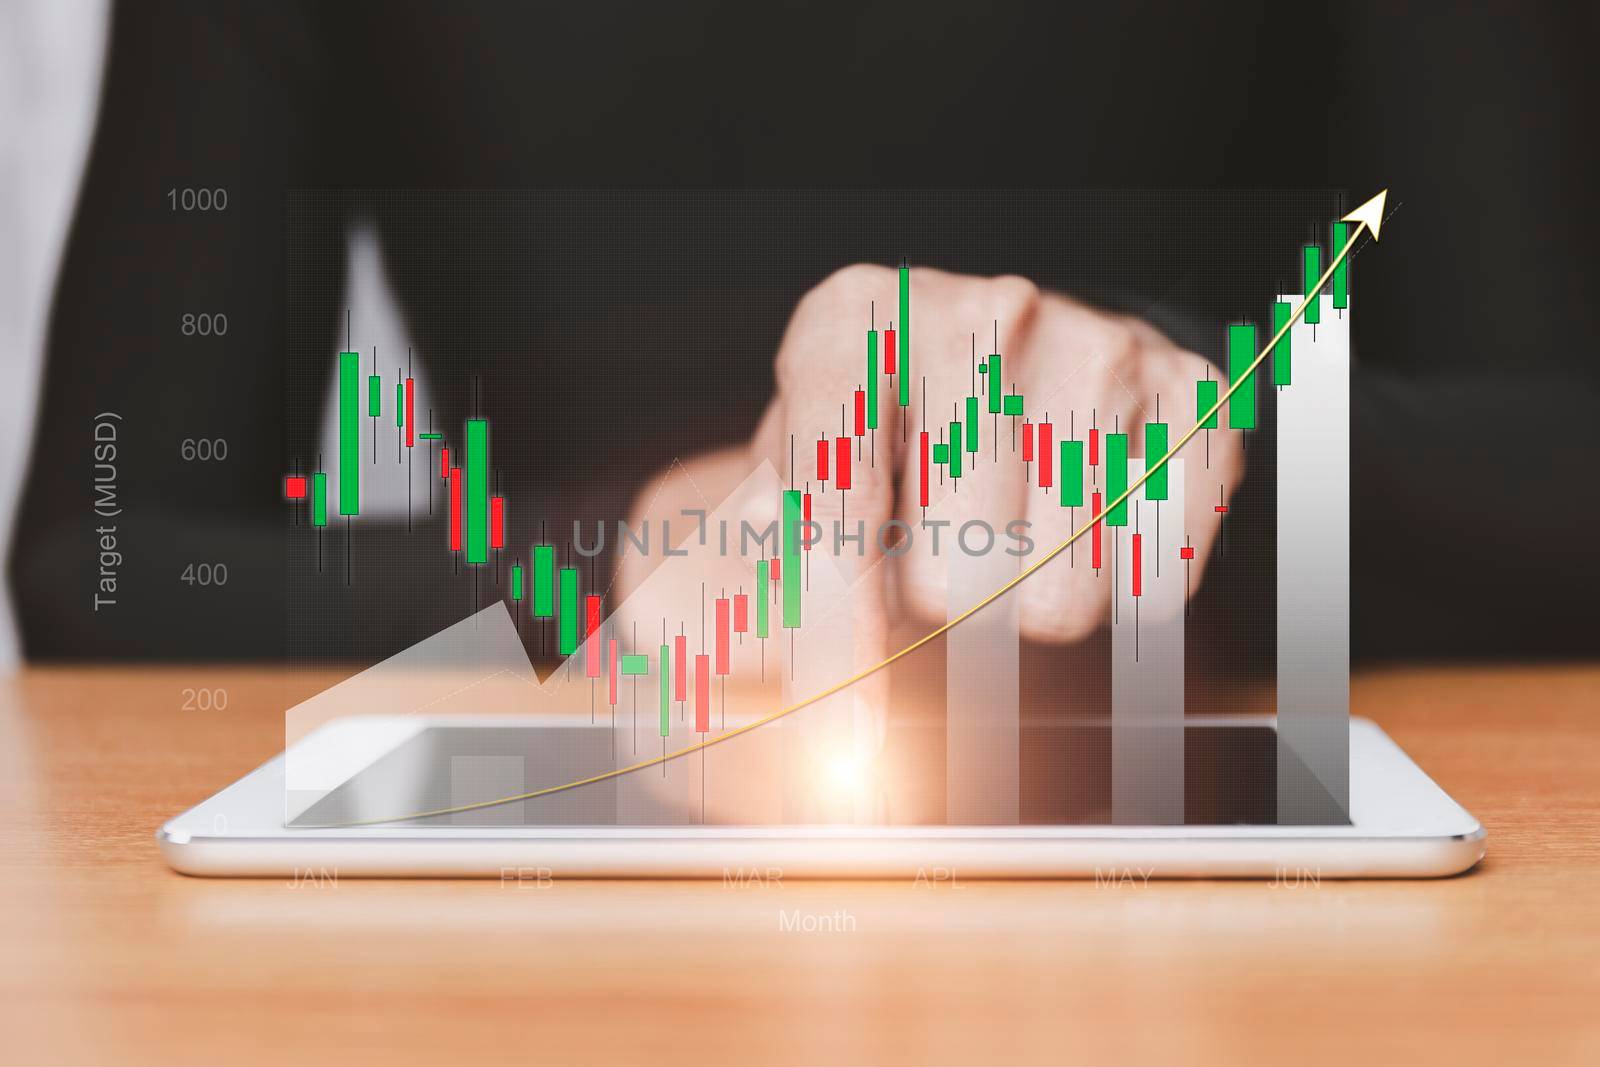 stock market growth up. Businessman holds tablet and displays holographic graph showing statistics of profitable graphs. Ideas of growth planning and business strategies to see trends in good business